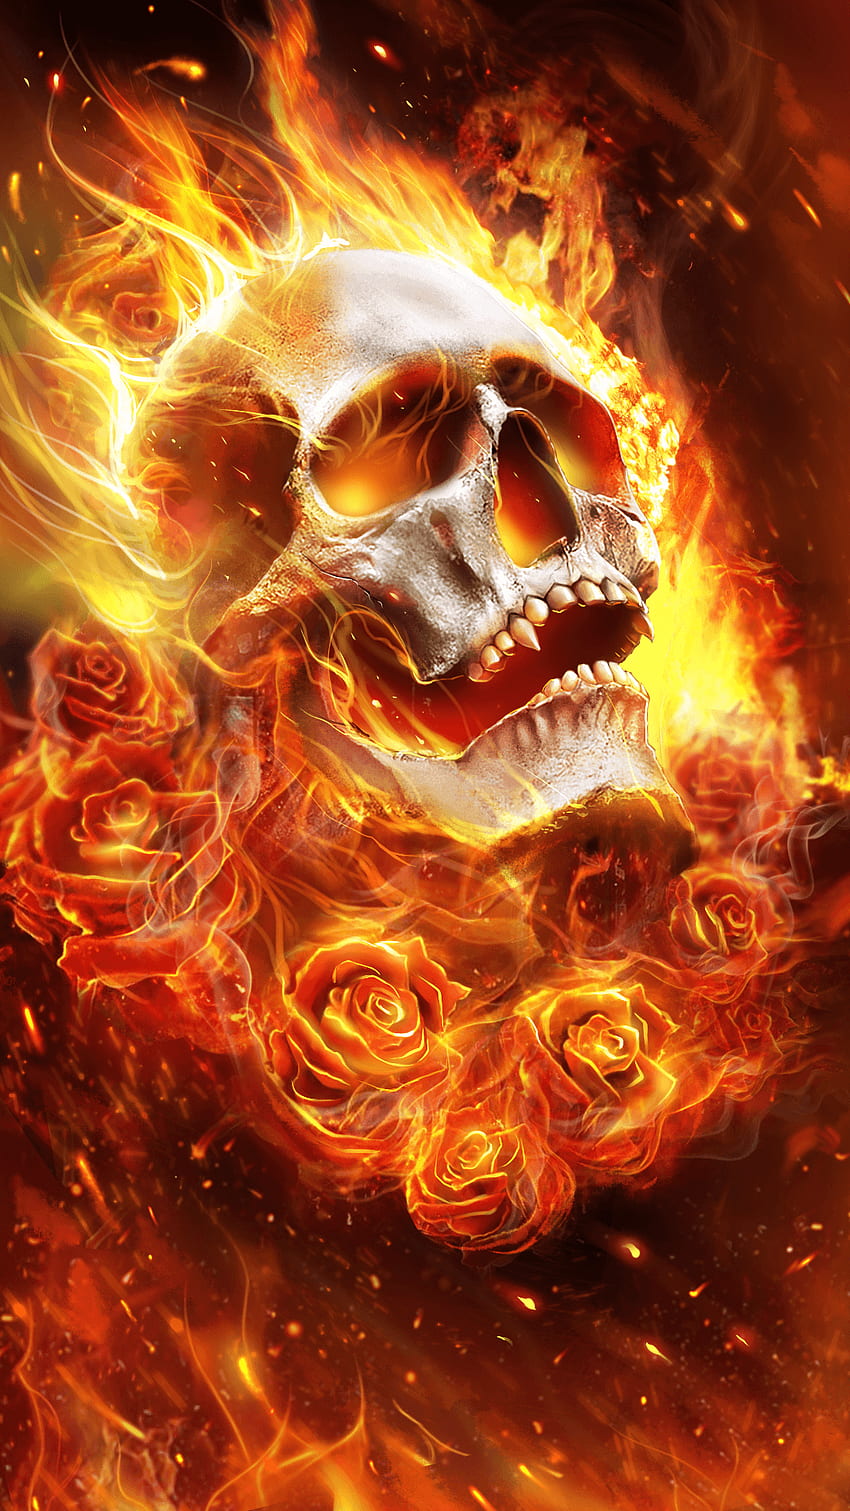 How to Draw a Flaming Skull - Really Easy Drawing Tutorial